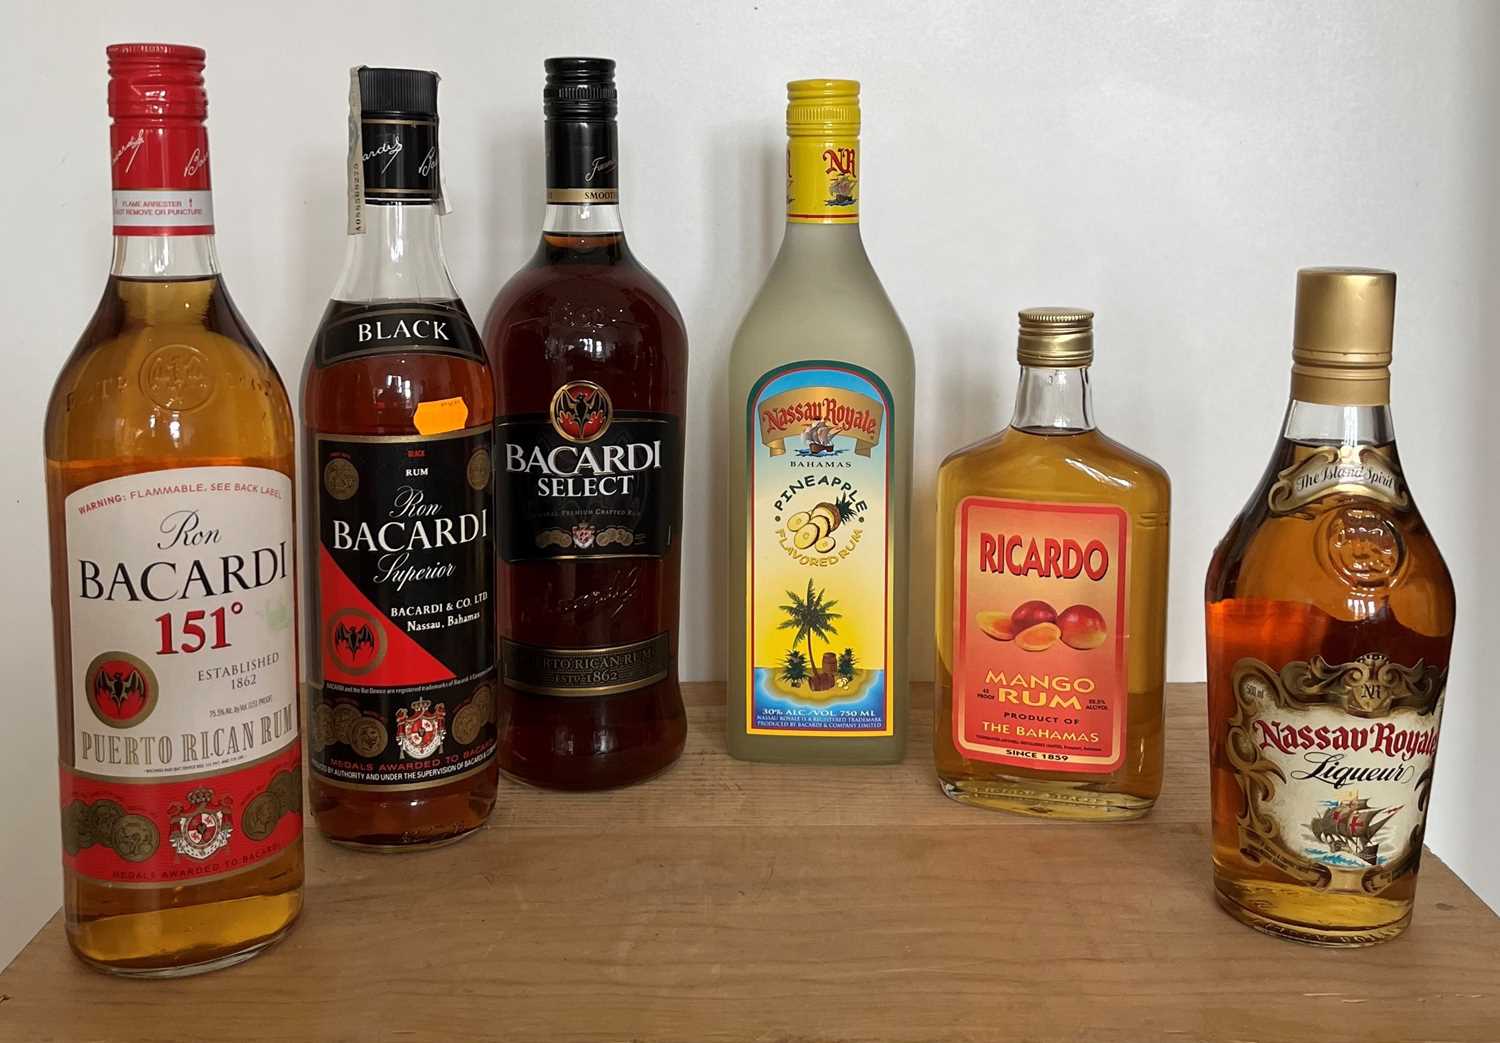 Lot 76 - 6 Bottles including 1 Litre, 1 x 50cl and 1 x 37.5cl Mixed Lot Various Rum and Rum Liqueurs